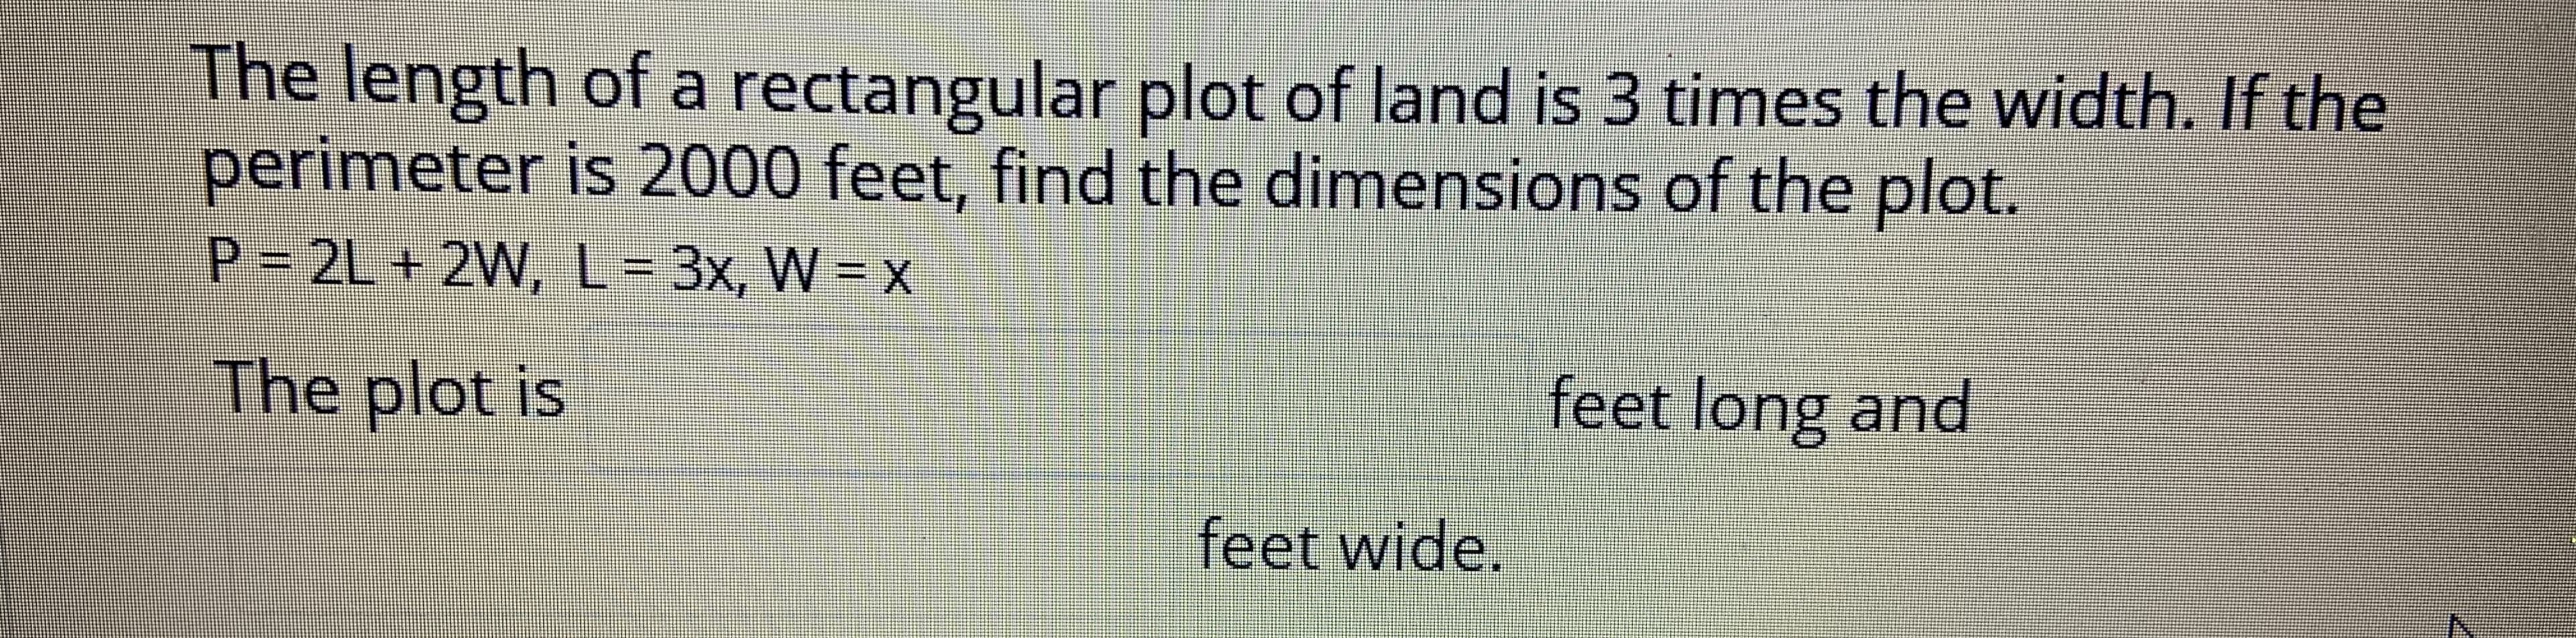 The length of a rectangular plot of land is 3 times the width. If the
perimeter is 2000 feet, find the dimensions of the plot.
P 2L+ 2W, L 3x, W = X
The plot is
feet long and
feet wide.
